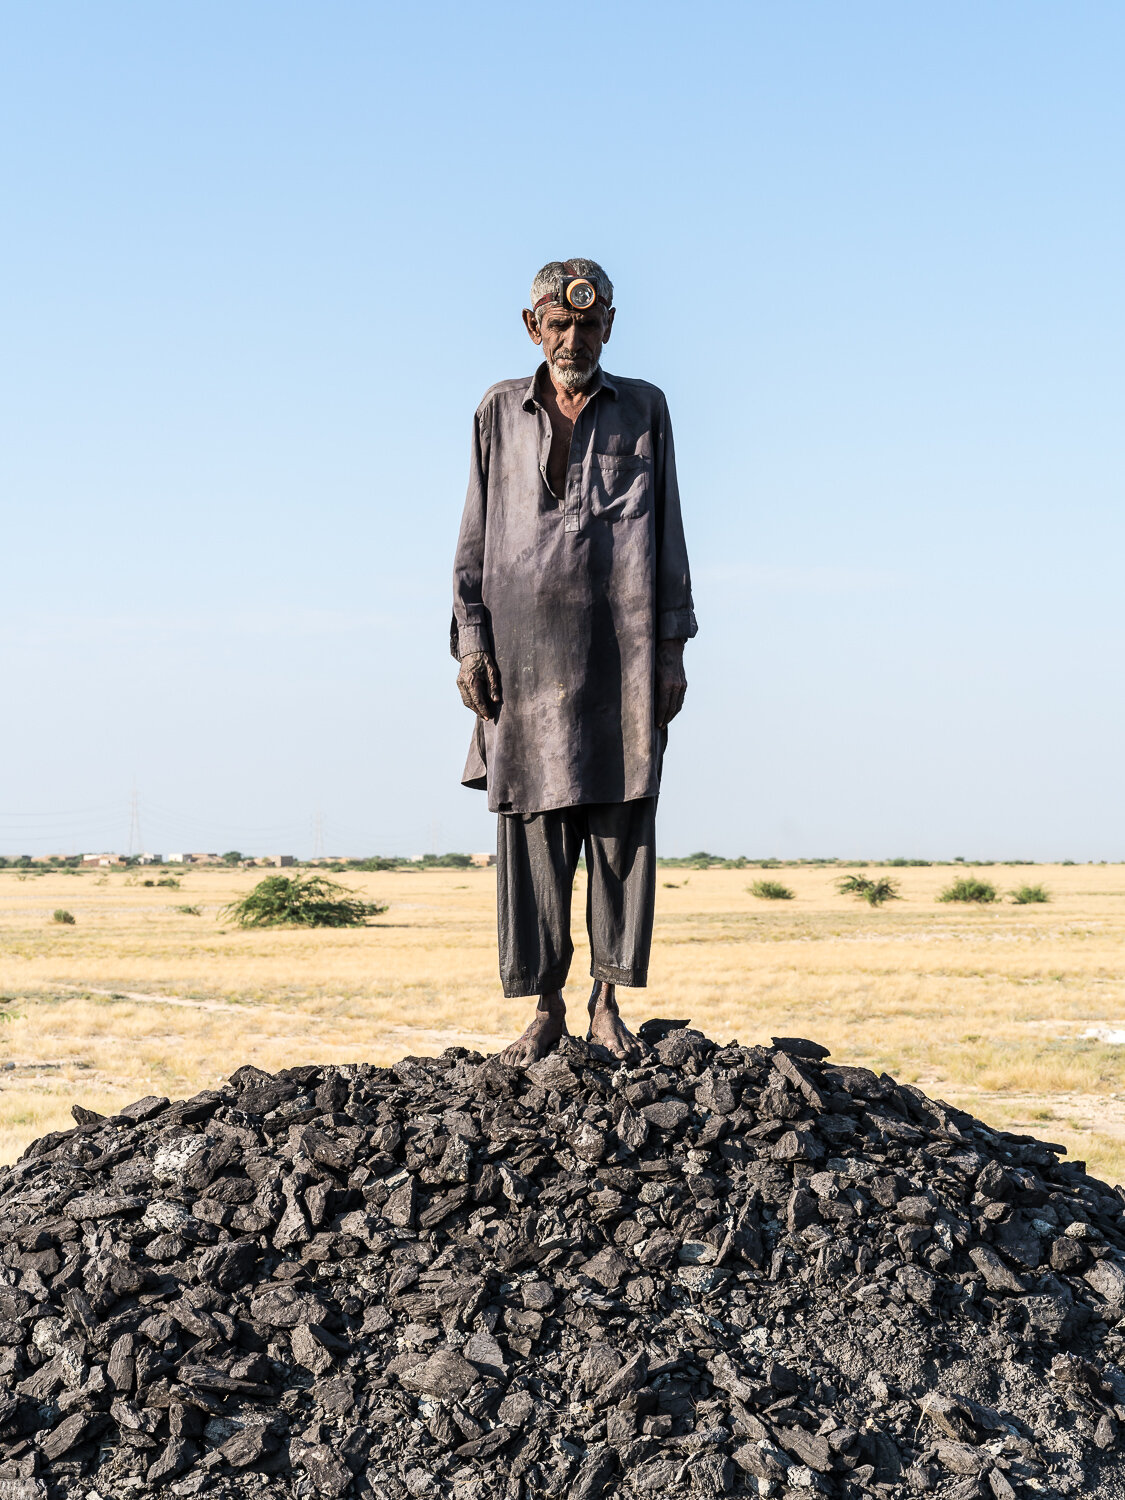  Jan Muhammad Khaskheli, 65, poses for a portrait at the Lucky Coal Mine where he has worked for the past three years on Monday, October 14, 2019 in Jhampir, Sindh, Pakistan. Before working as a coal miner, Khaskheli was a lifelong fisherman on Lake 